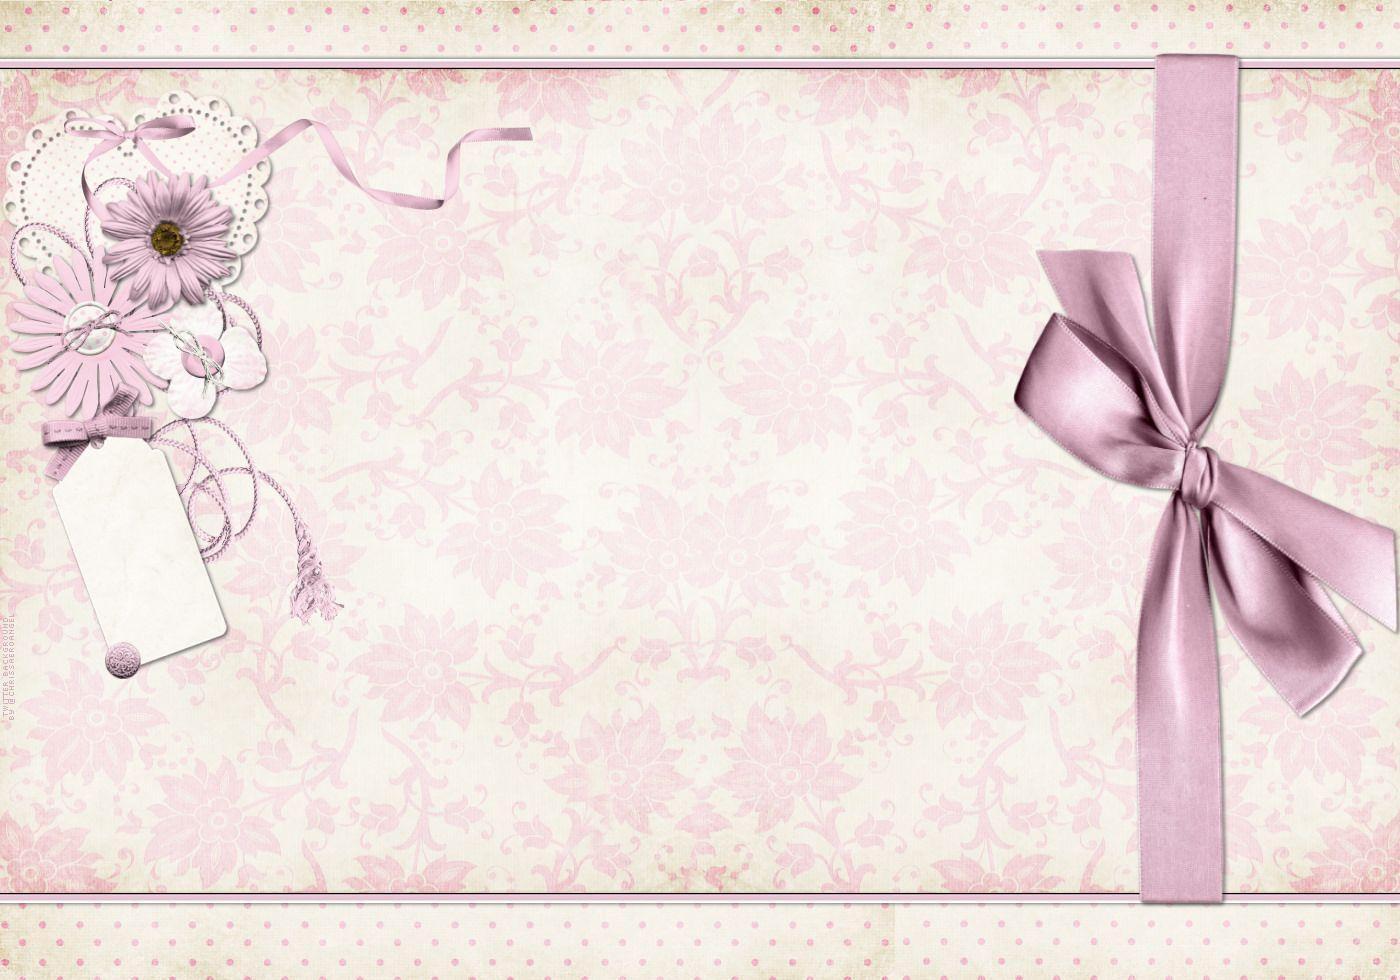 Pink N&; White Twitter Background, Pink N&; White Twitter Themes